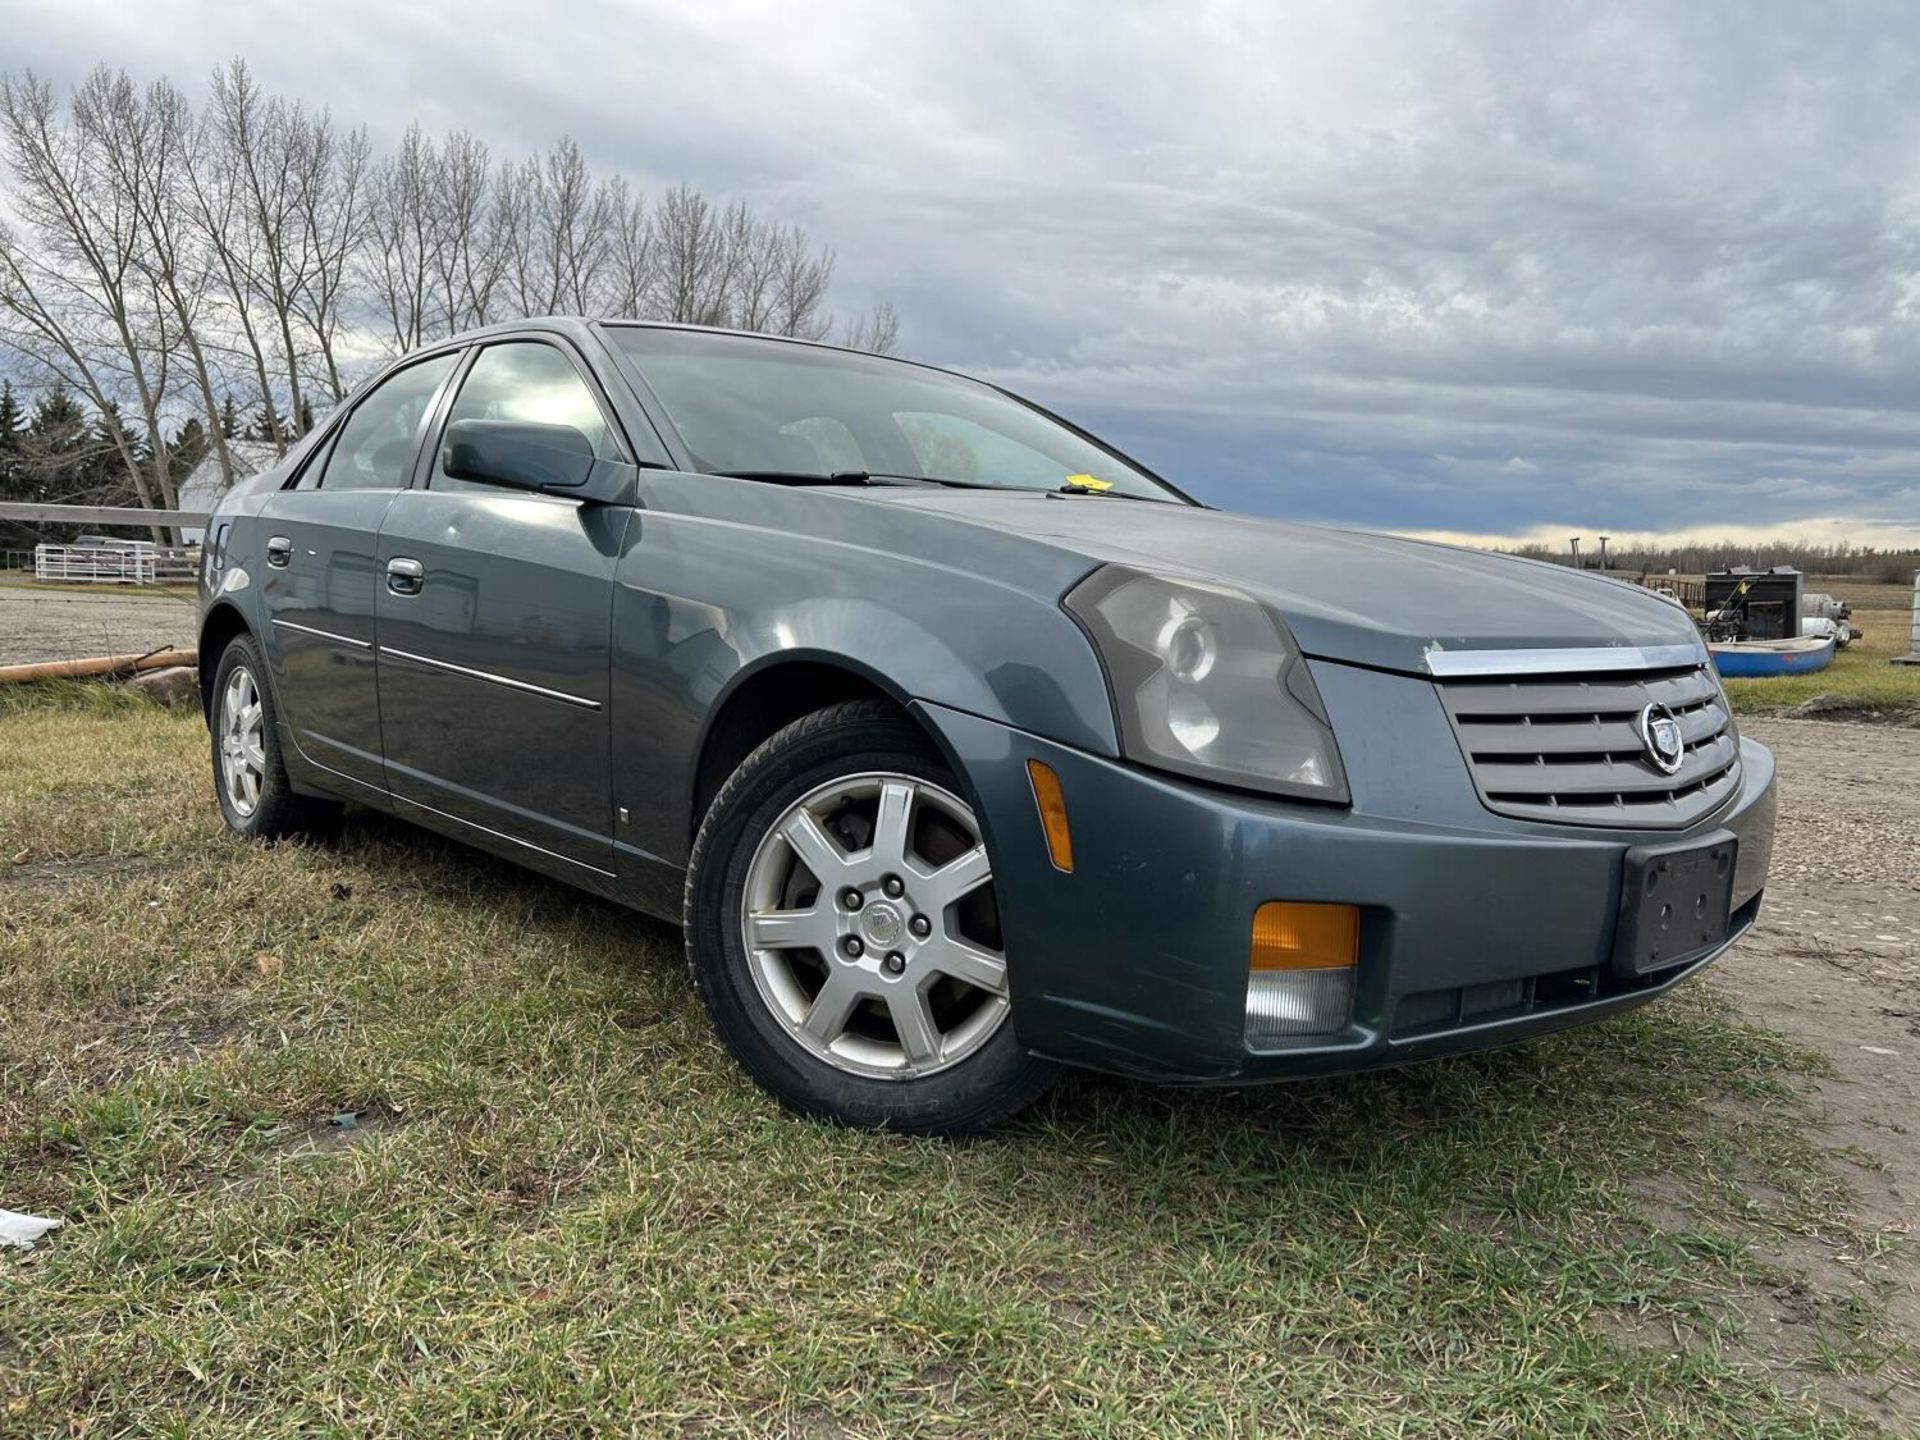 2006 CADILLAC CTS SEDAN, AT, 2.8L V6 ENG, 179,971 KM SHOWING, NEW BATTERY, SUNROOF, LEATHER